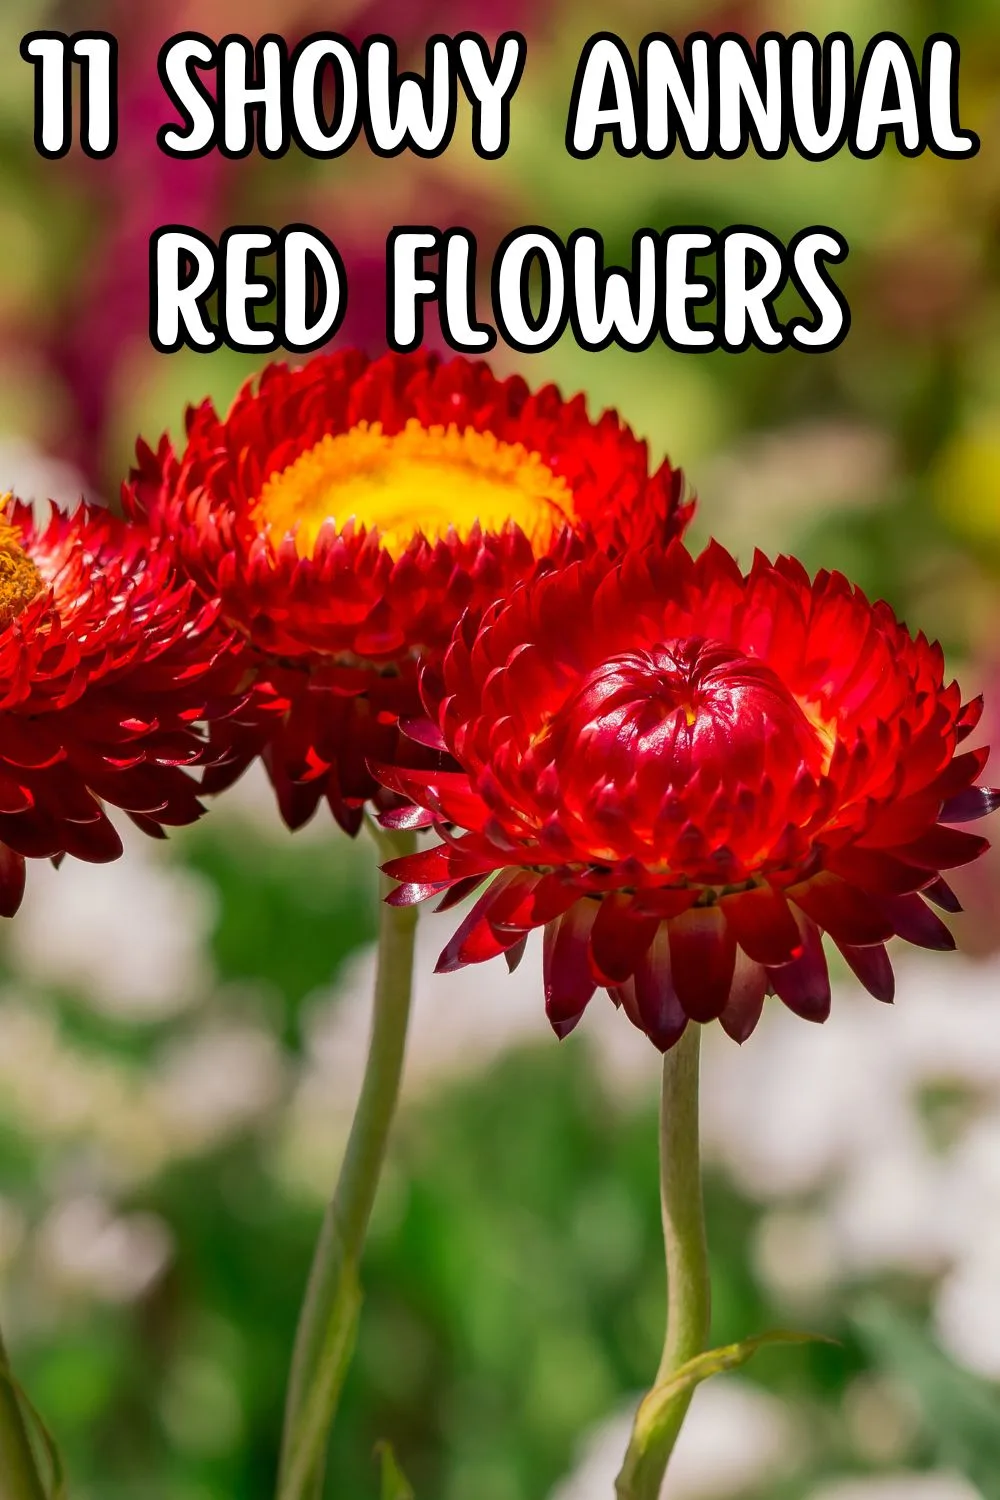 11 showy annual red flowers.